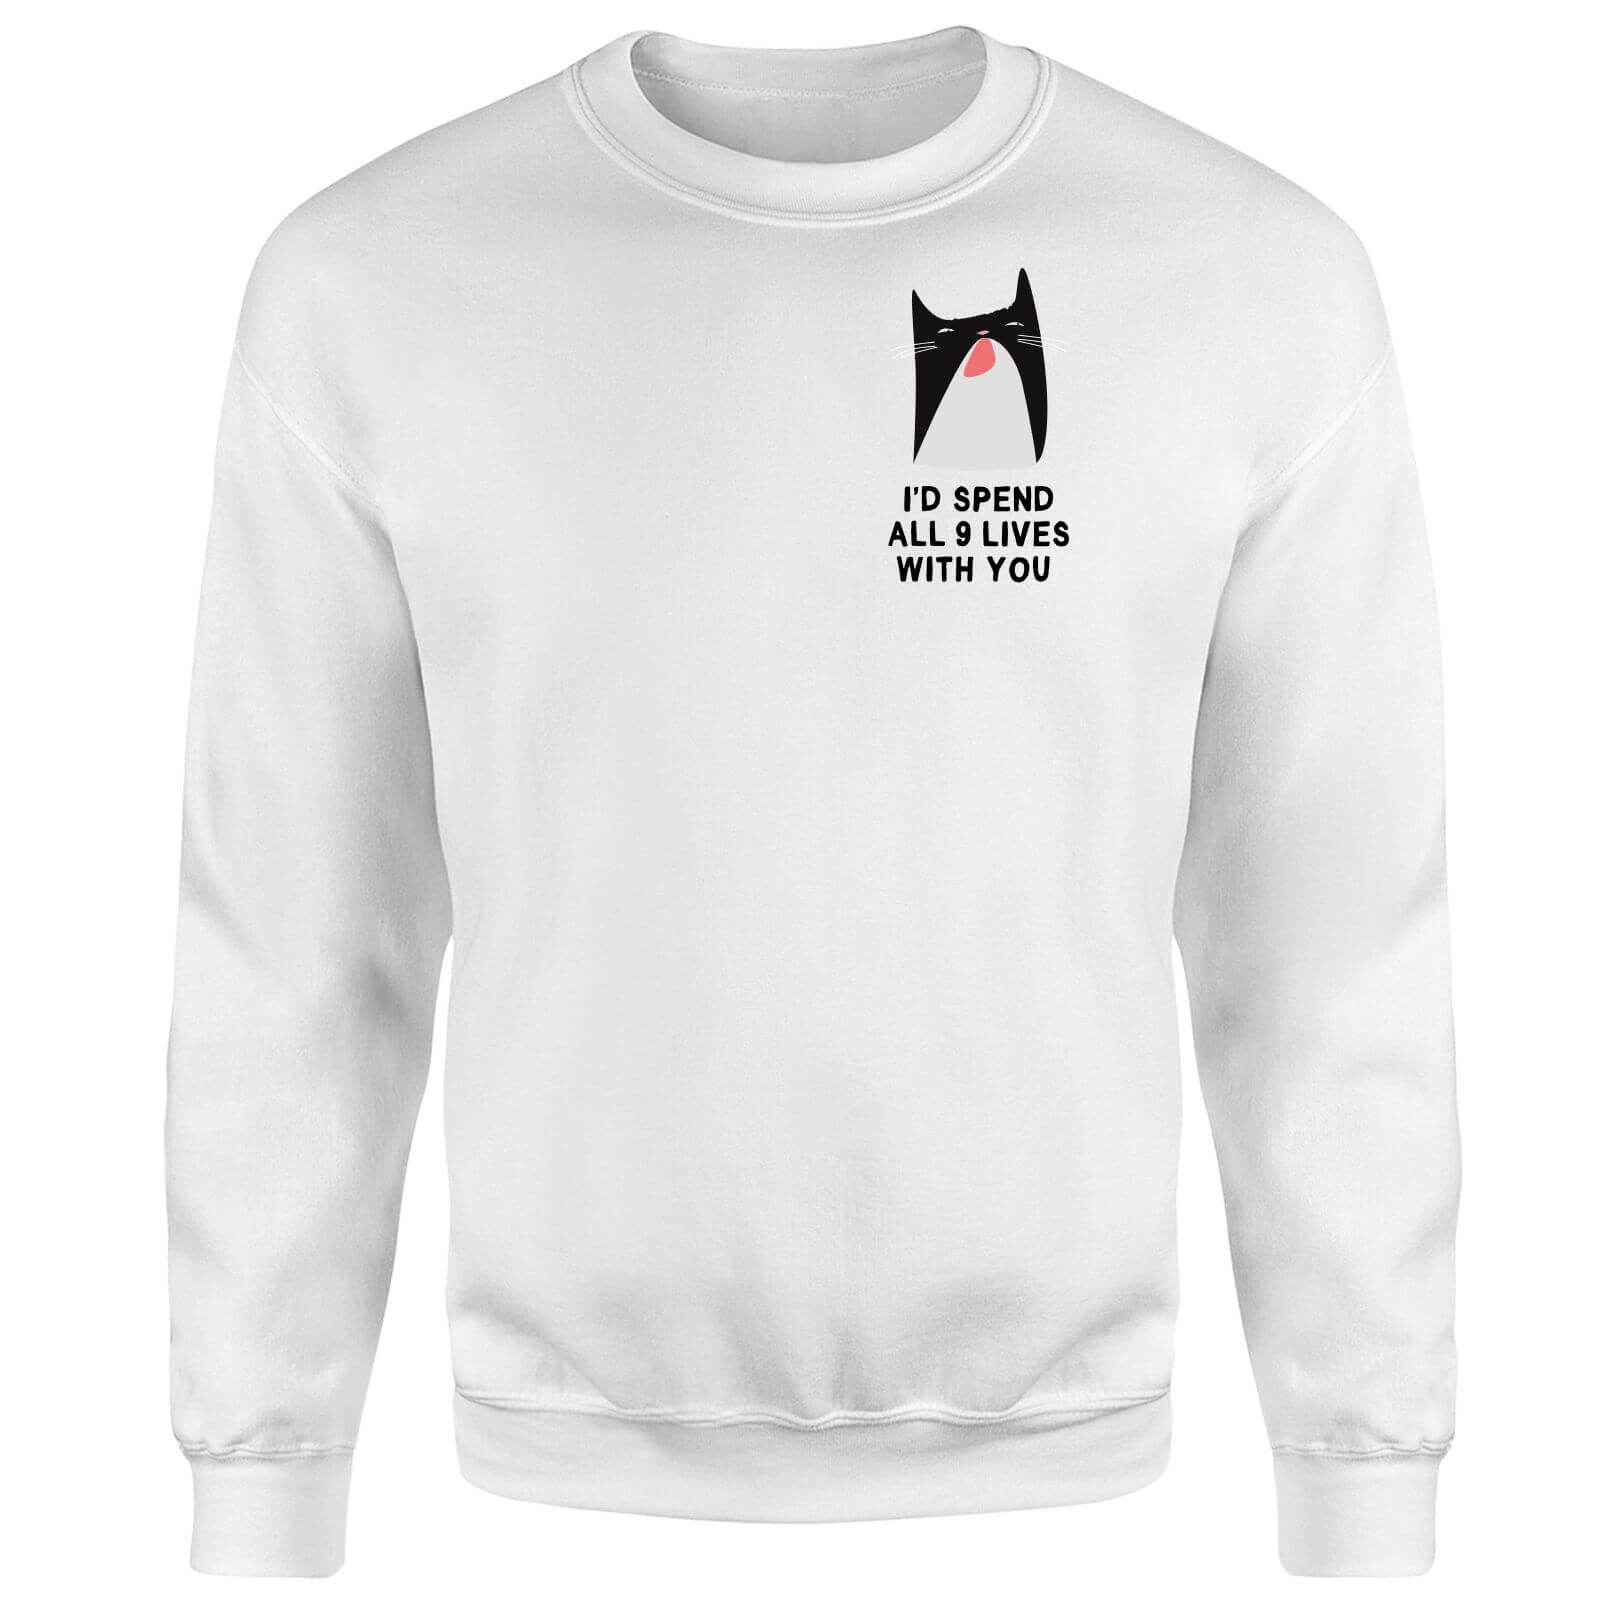 I'd Spend All 9 Lives With You Sweatshirt - White - XL - White